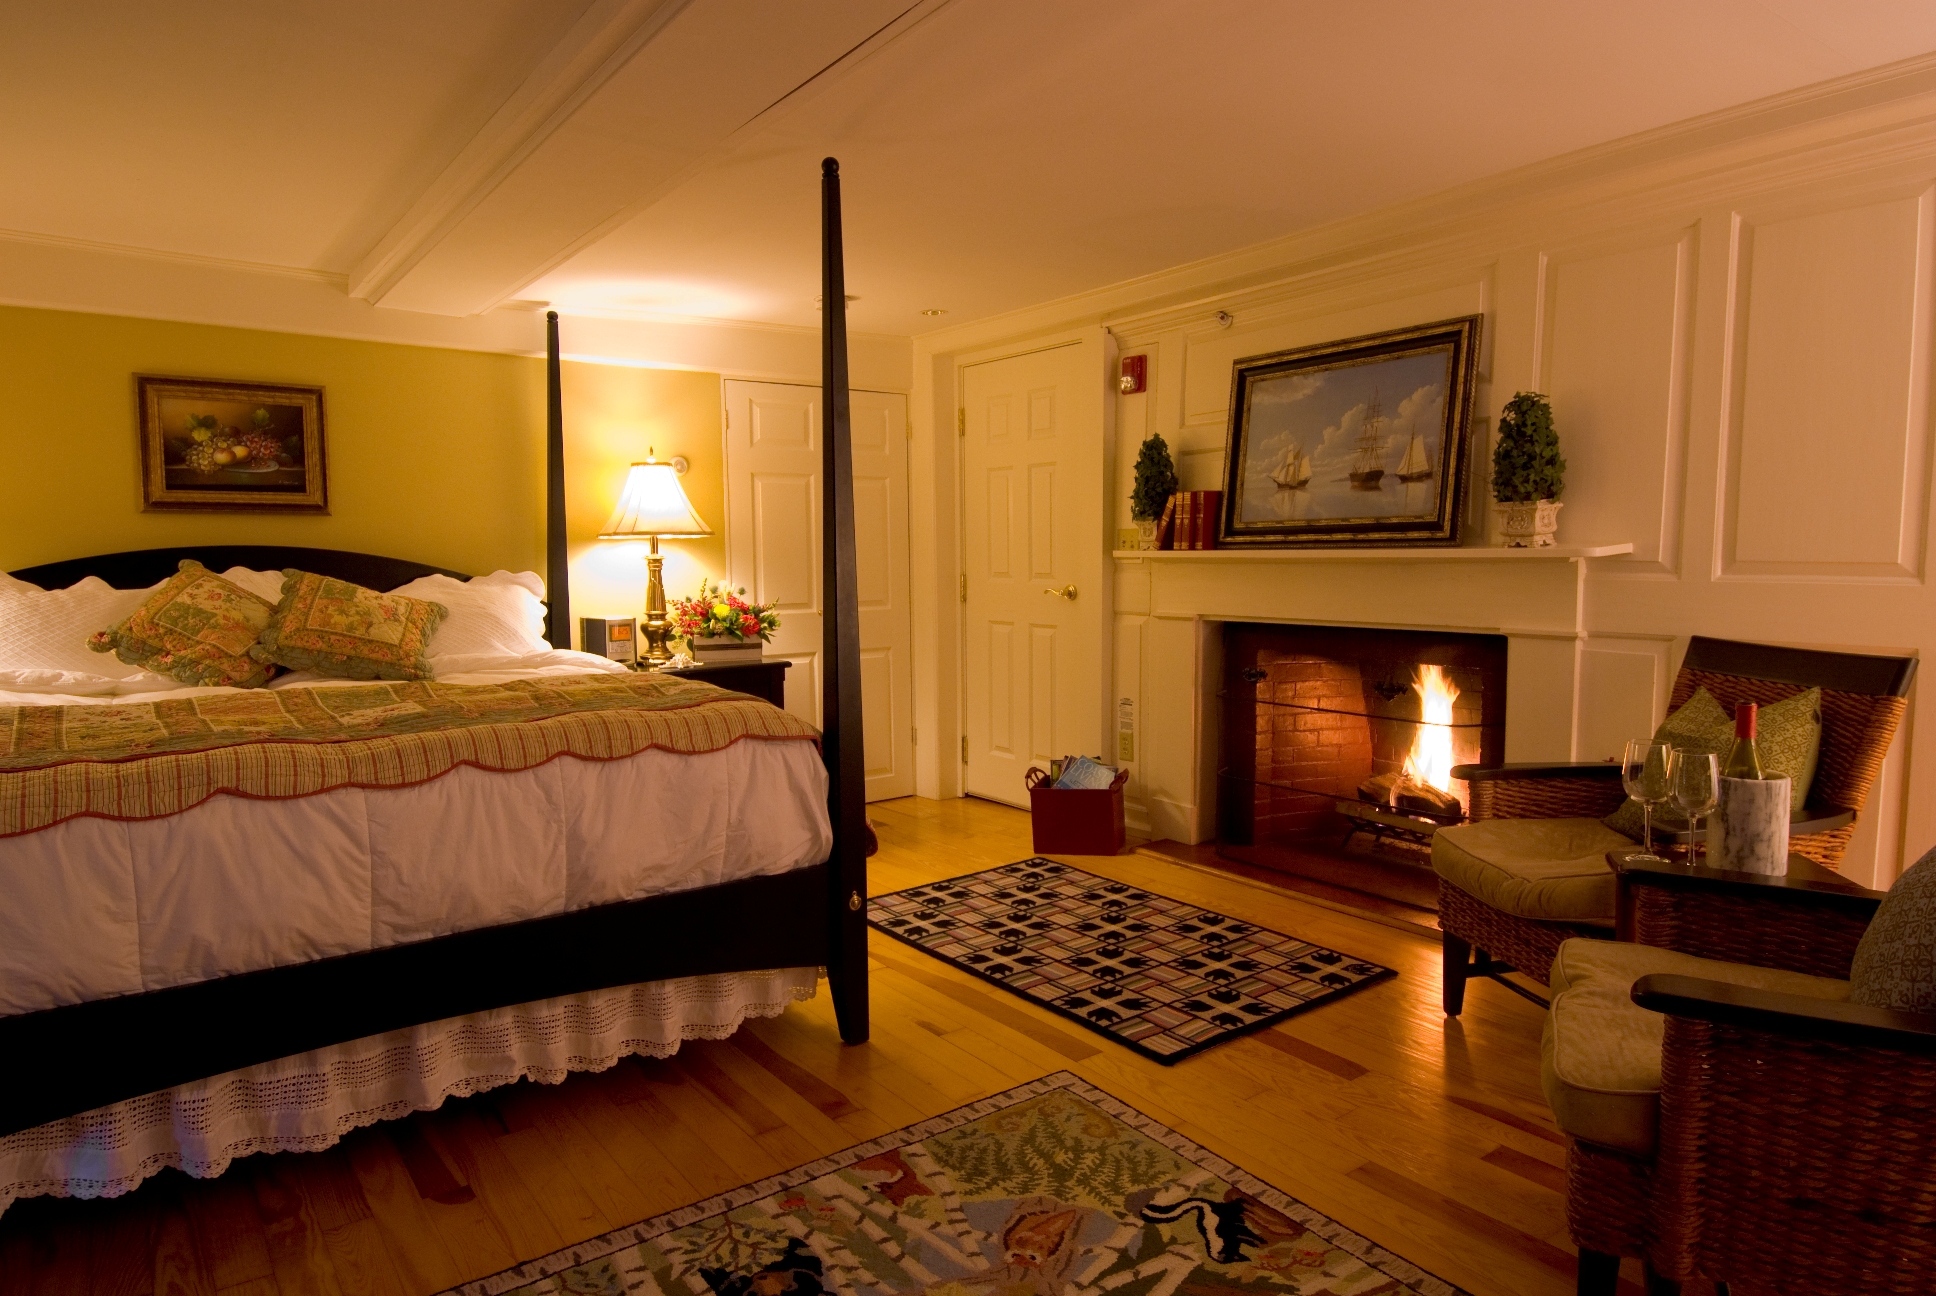 A four poster bed white linens, wood burning fireplace, and two rattan whicker chairs.